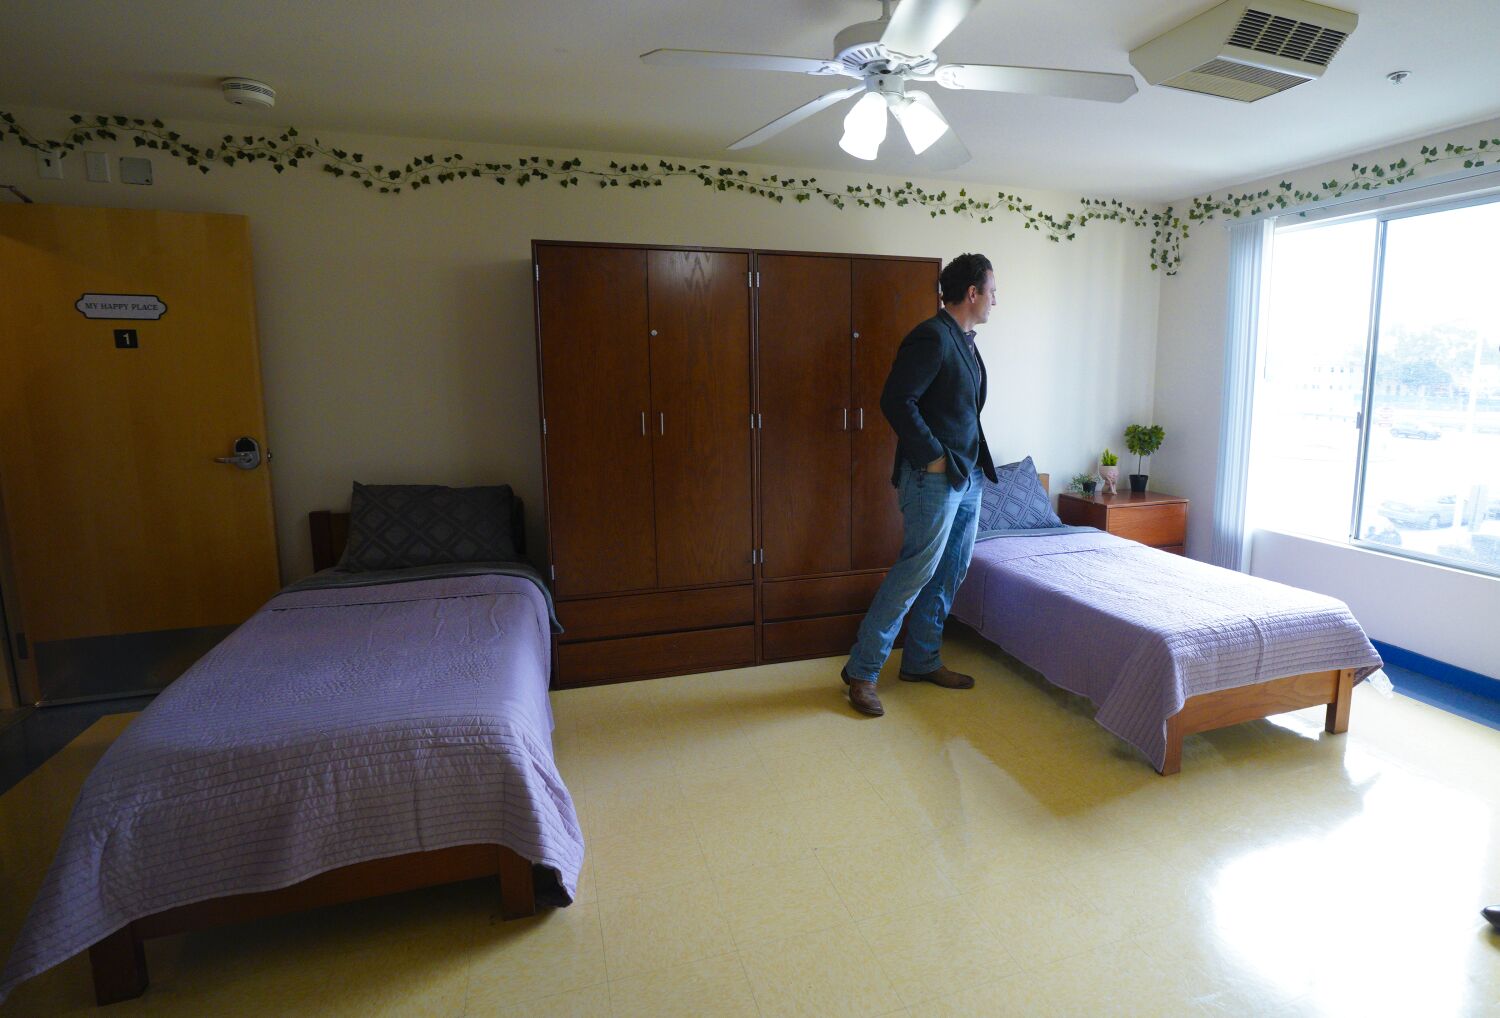 A safe haven for homeless people with addiction, mental health issues